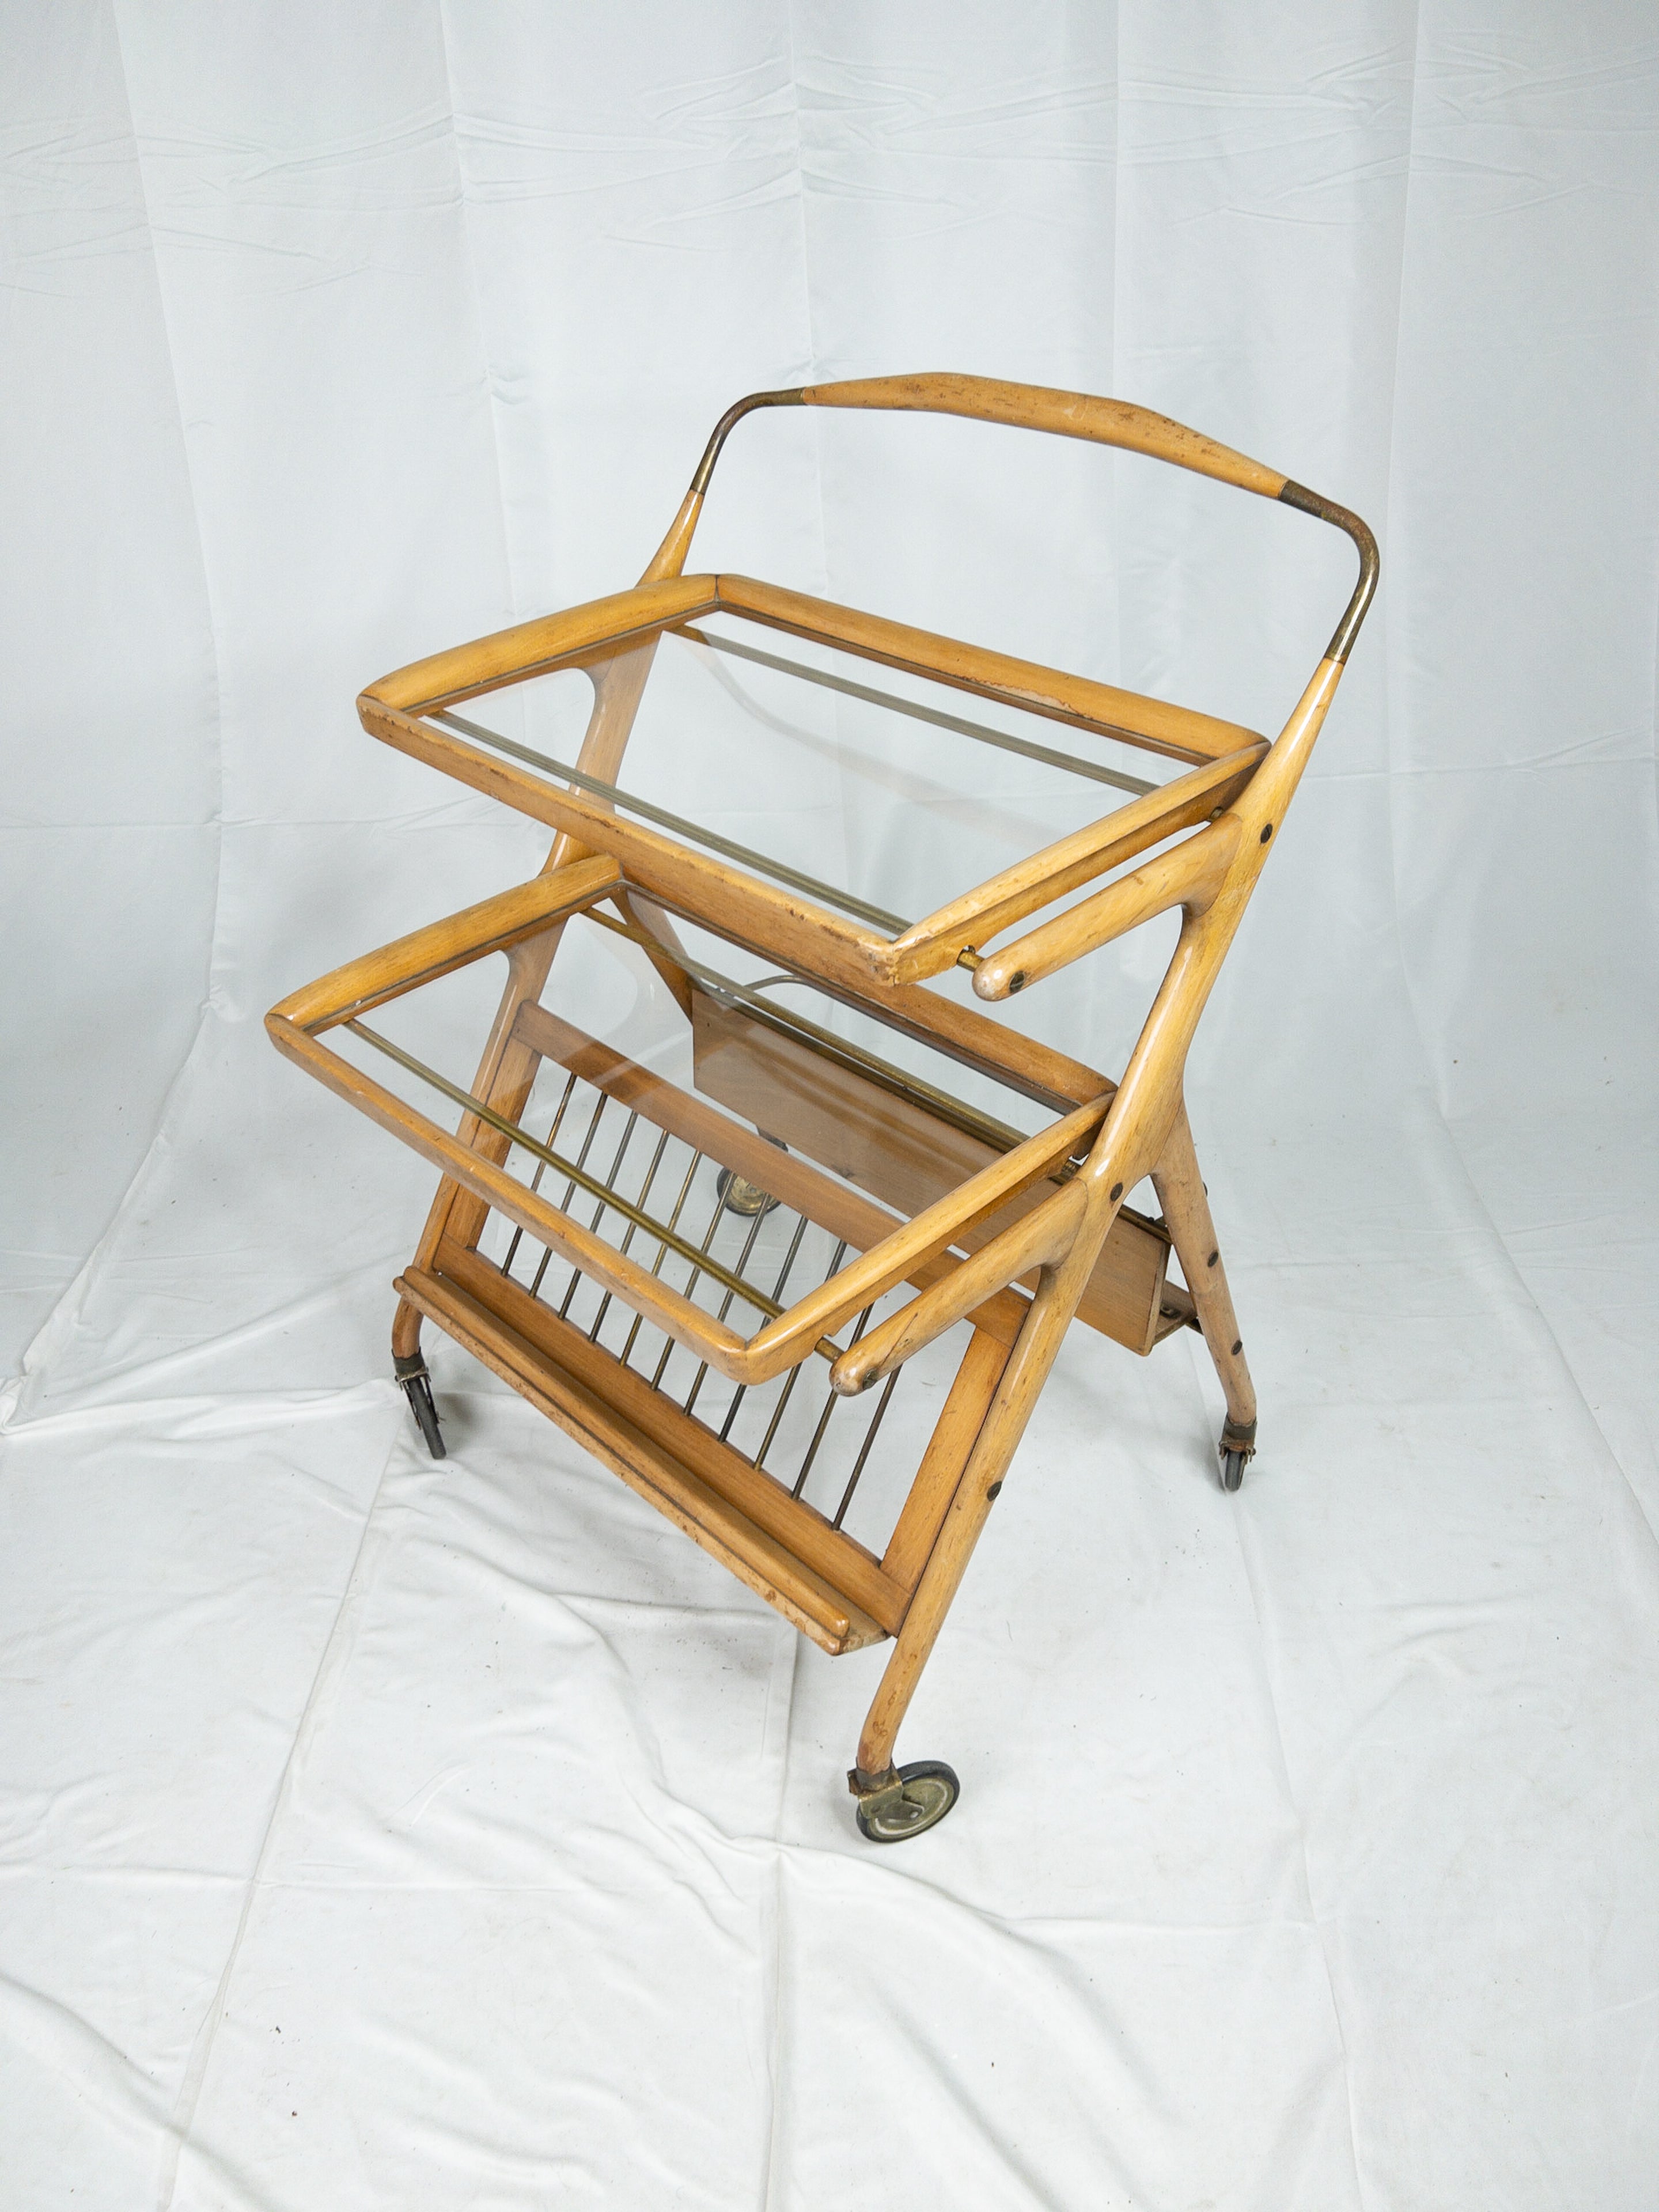 The 1960s French collapsible wooden bar cart encapsulates the essence of mid-century modern design with its sleek and functional aesthetic. Crafted from rich, warm wood, this exquisite piece seamlessly merges form and function. Its ingeniously